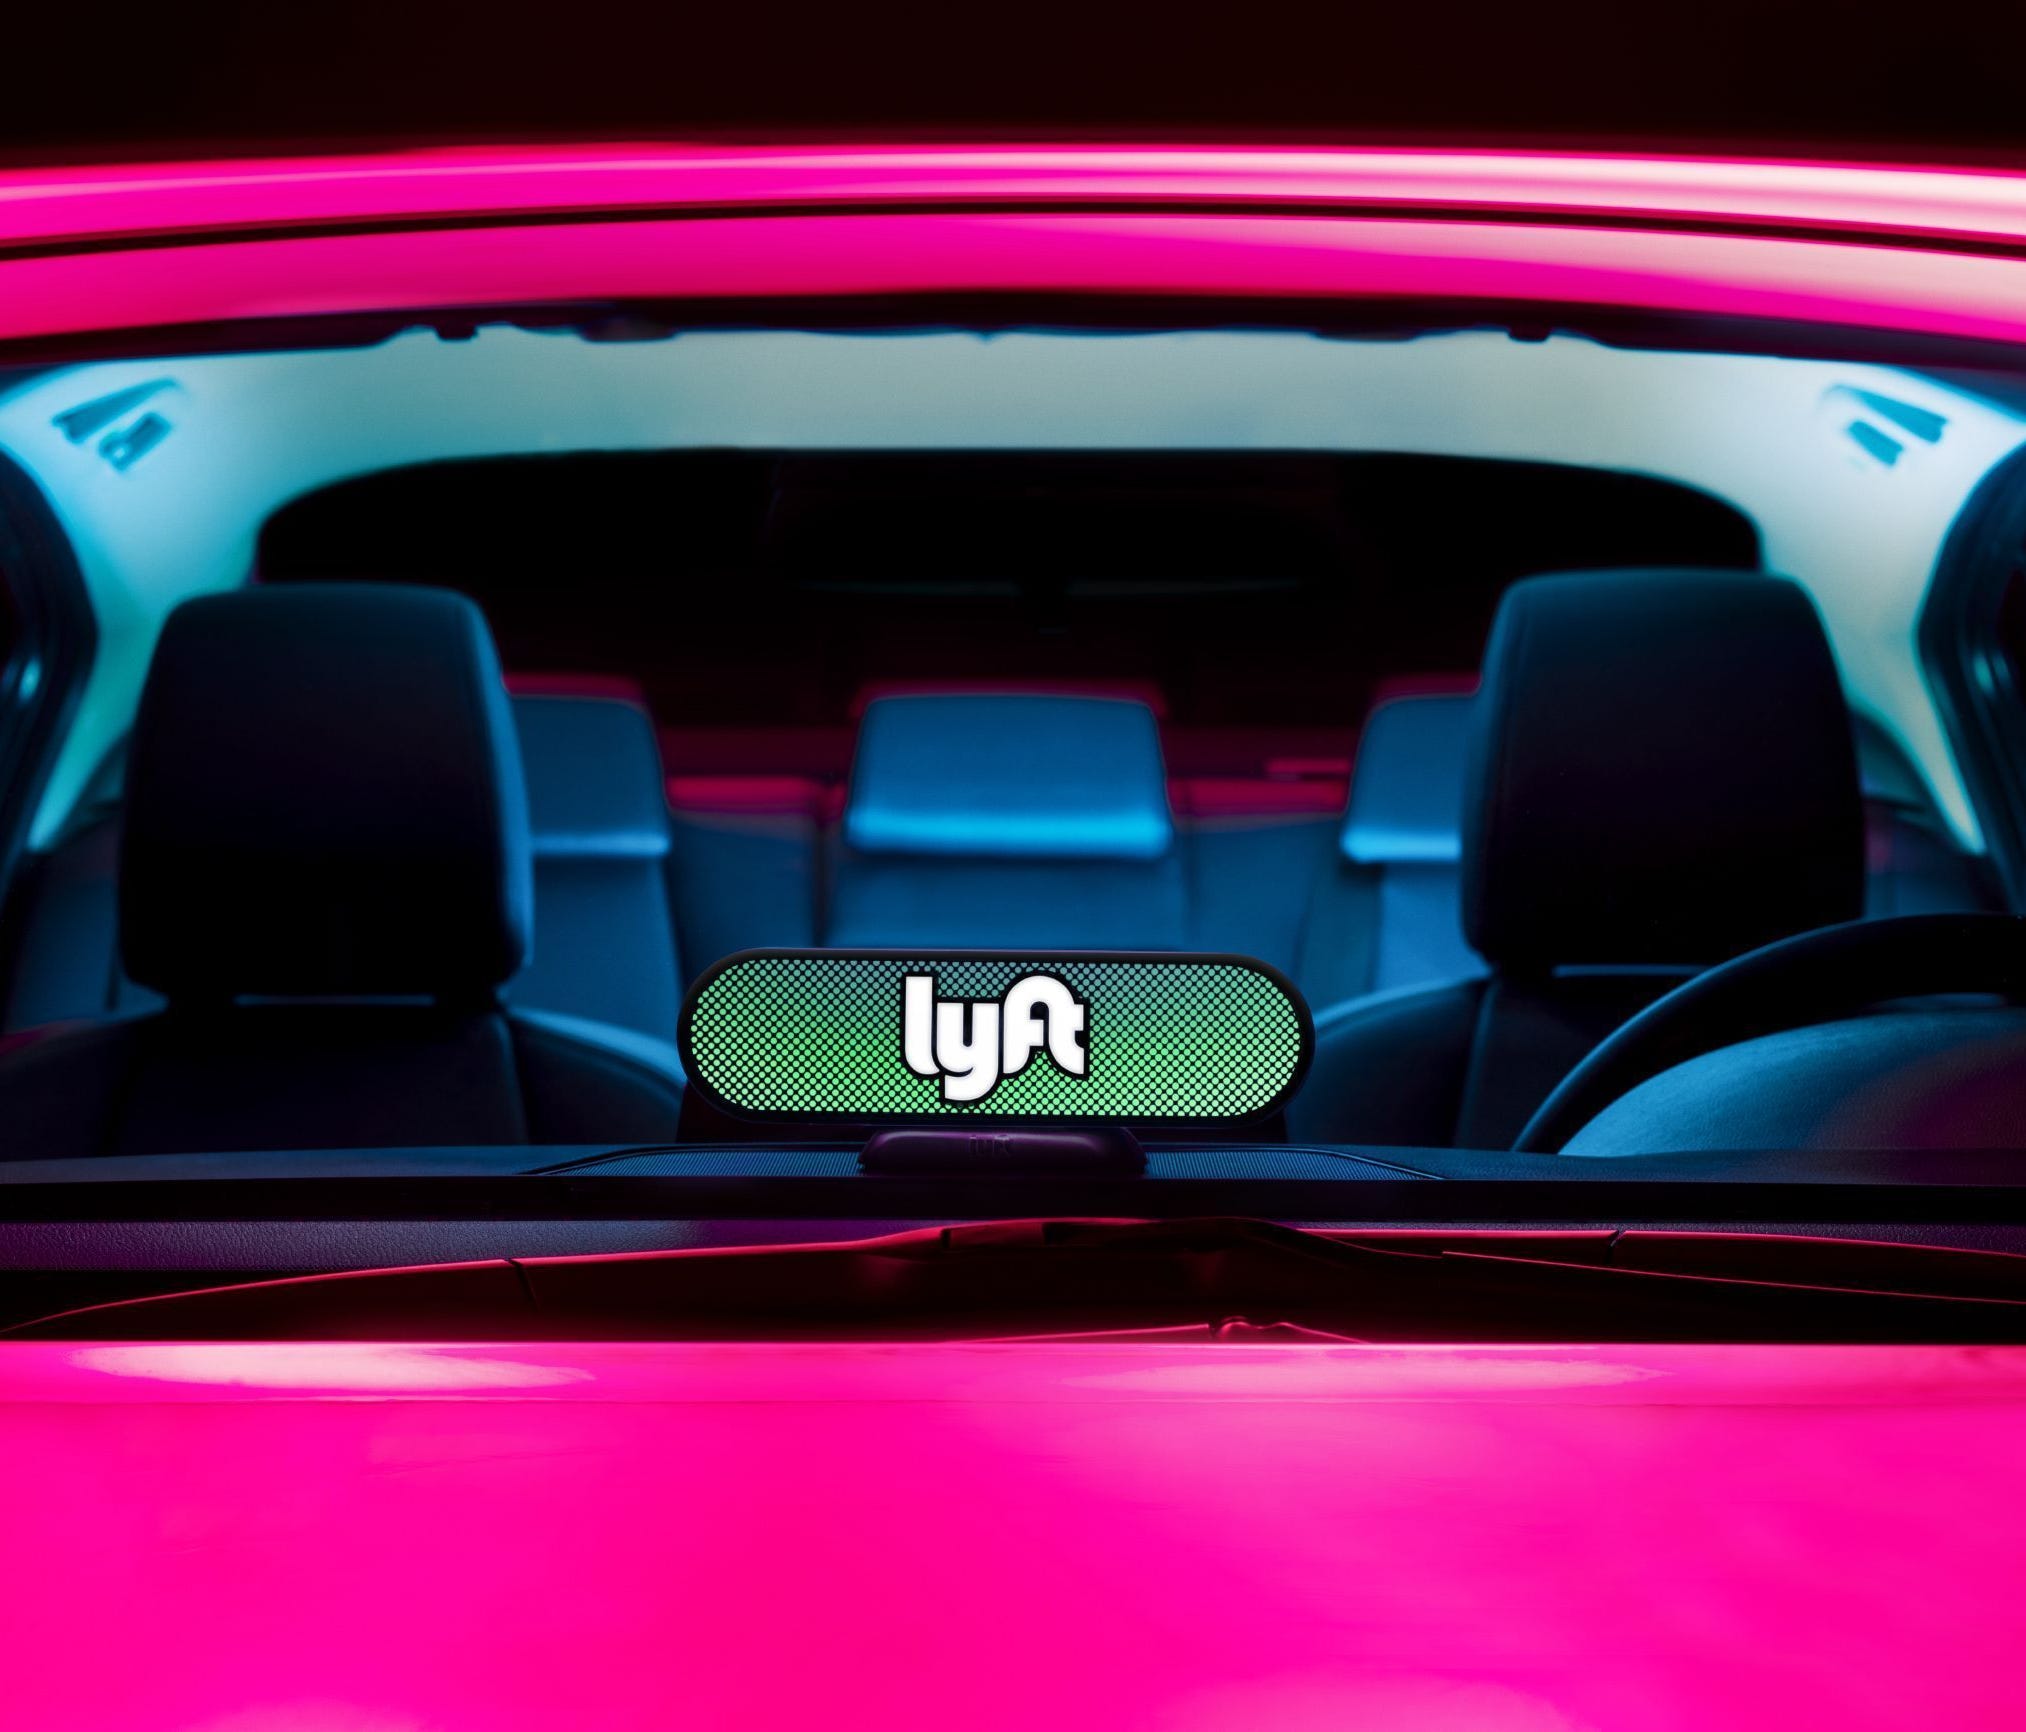 Lyft's new Amp device sits on the dashboard of a vehicle, replacing the company's signature pink Glowstache.